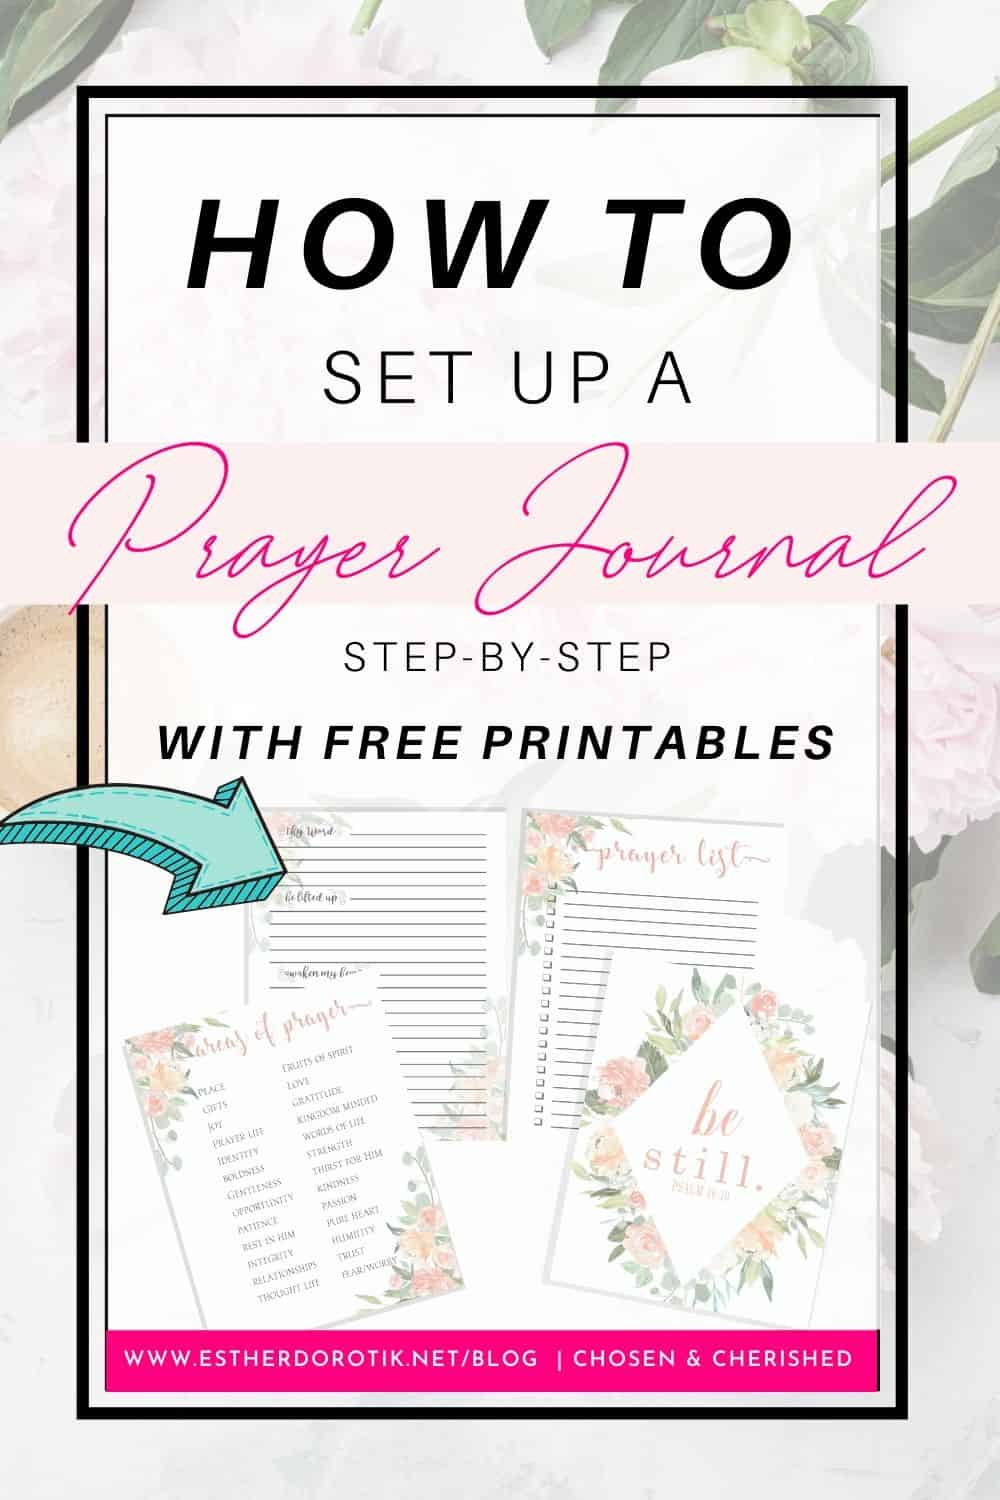 How To Set Up A Prayer Journal Free Prayer Journal Printables Learn